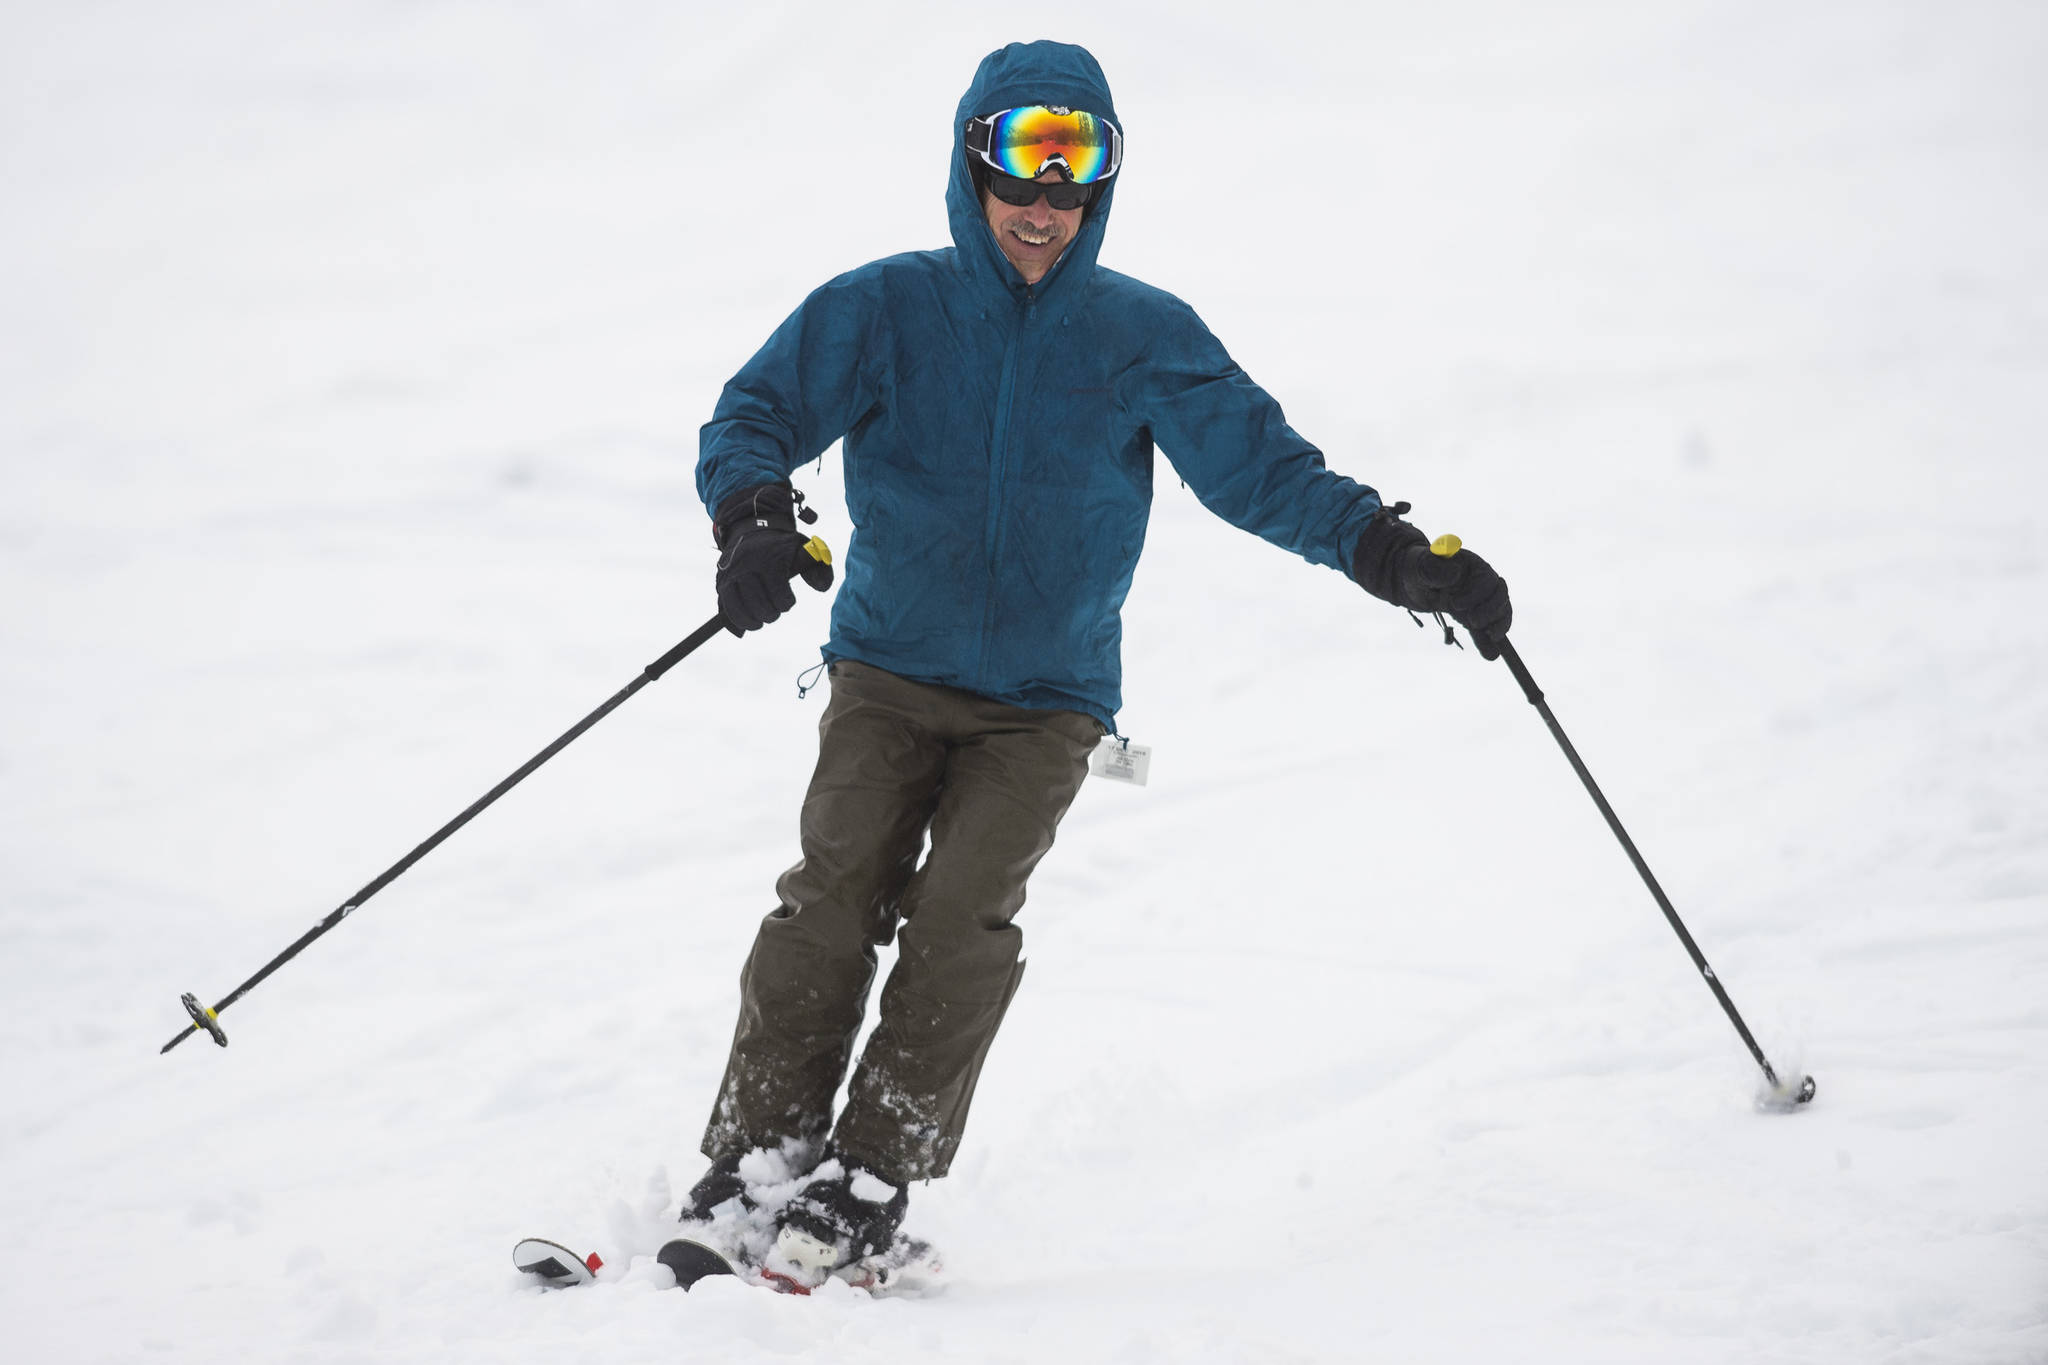 Jeff Sloss takes a first run after the Hooter Chairlift opened for the first time this season at Eaglecrest in December 2018. Eaglecrest will be hosting a series of film screenings this month. (Michael Penn | Juneau Empire File)